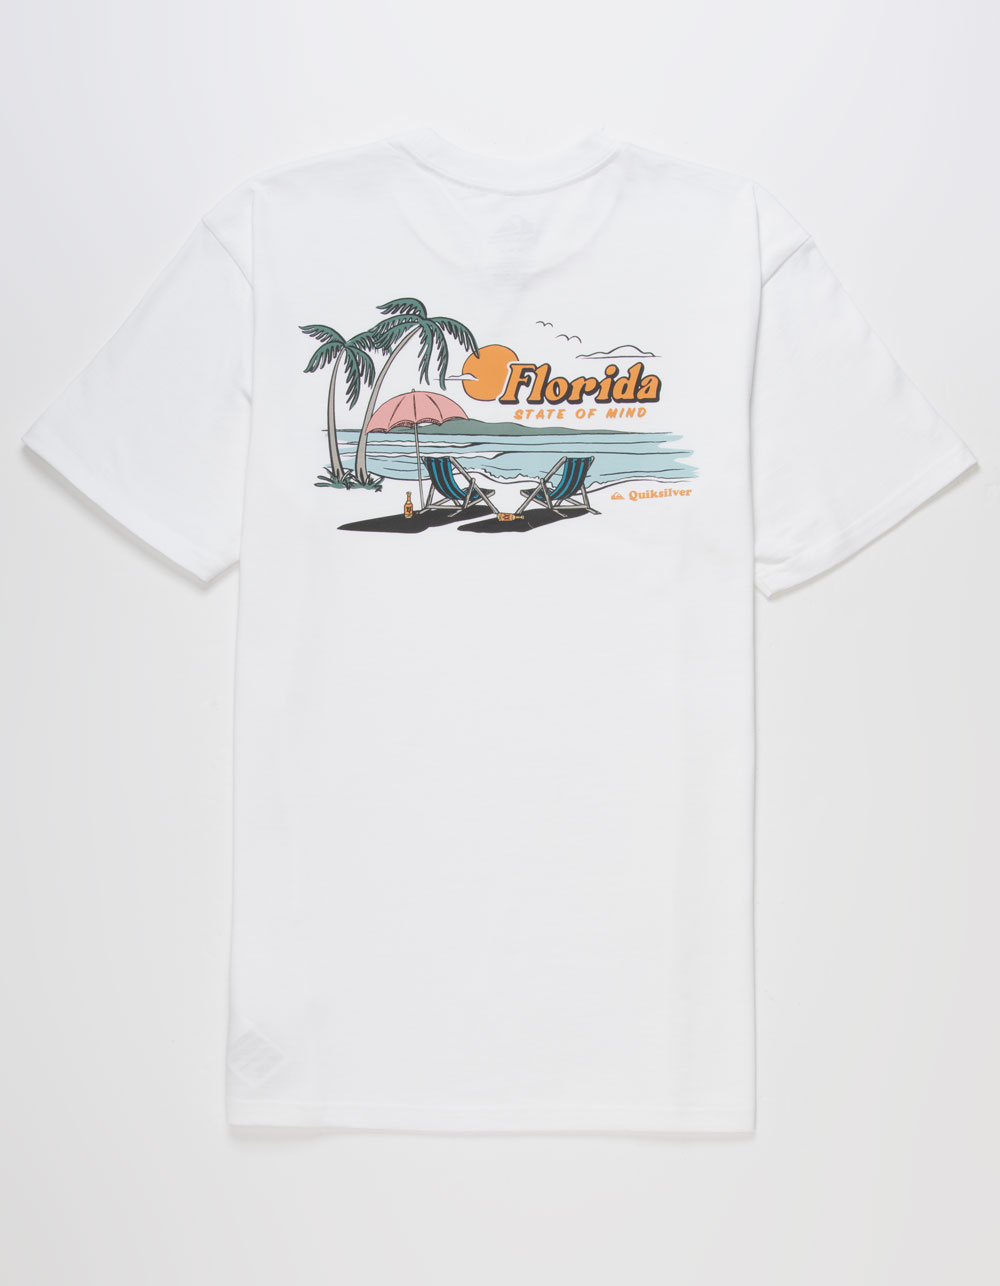 QUIKSILVER Florida State Of Mind Mens Tee